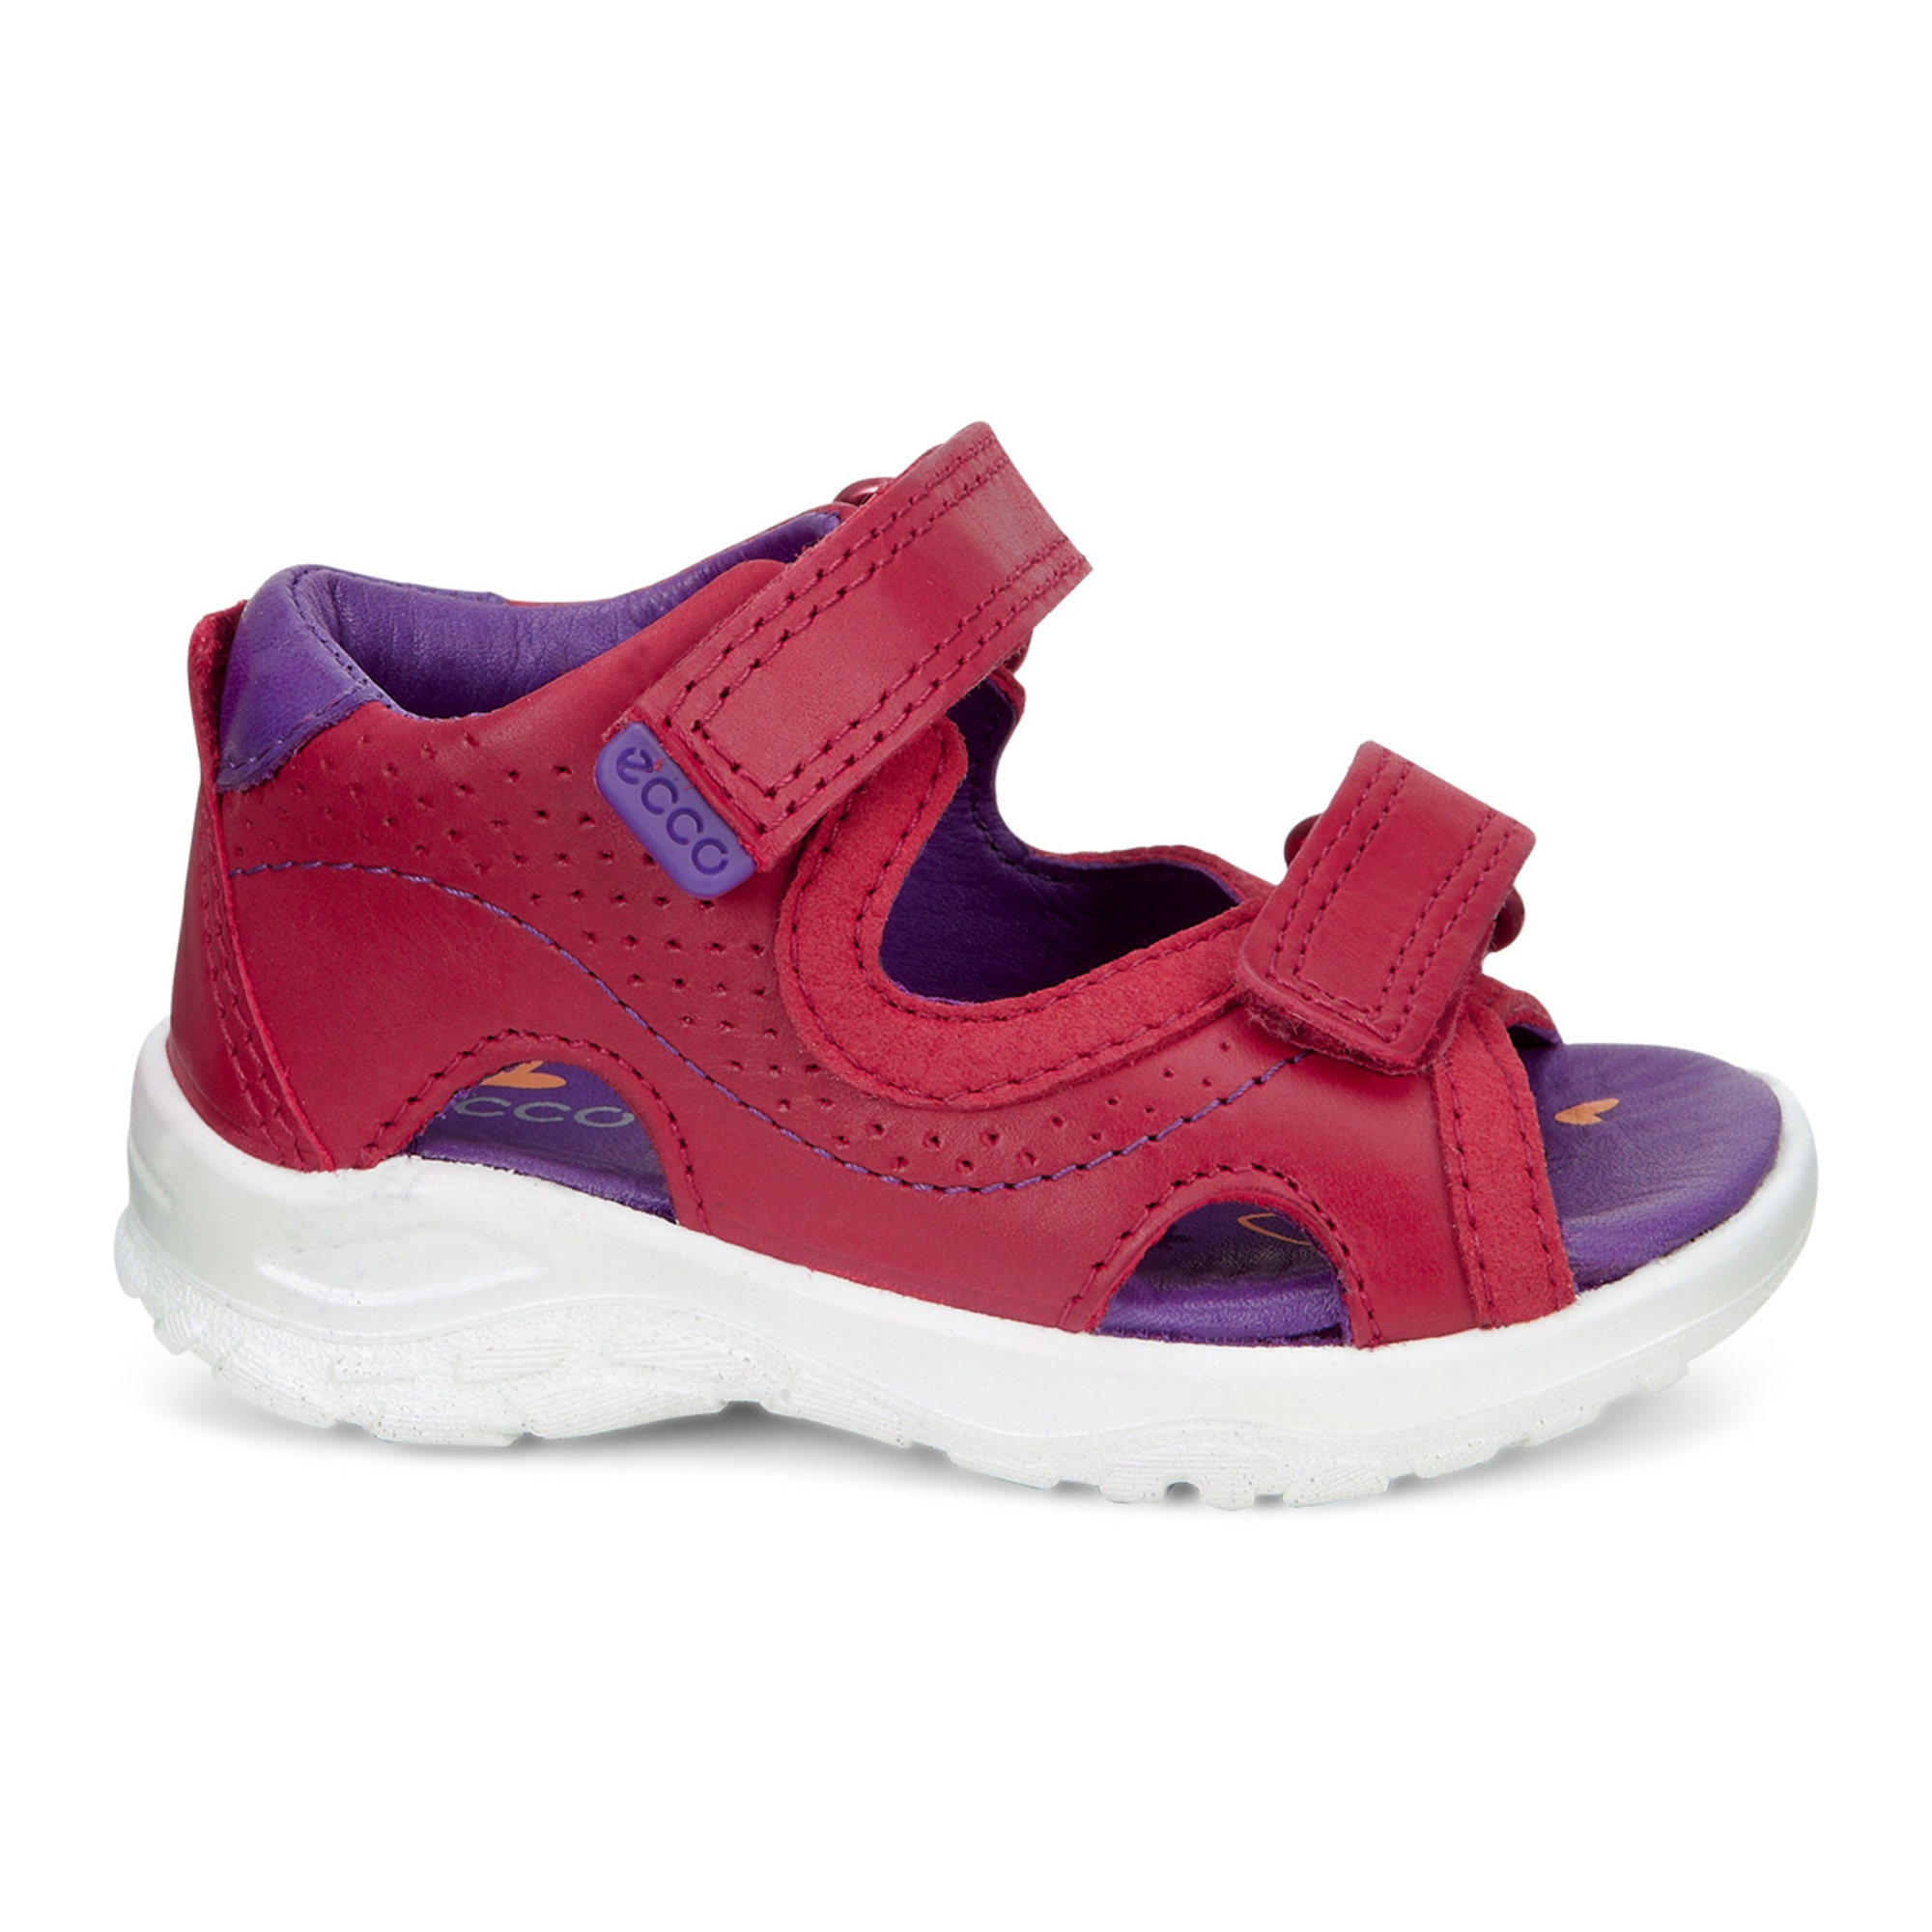 Ecco Peekaboo Infants Sandal 23 - Products - Veryk Mall - Veryk Mall, many product, quick your money!